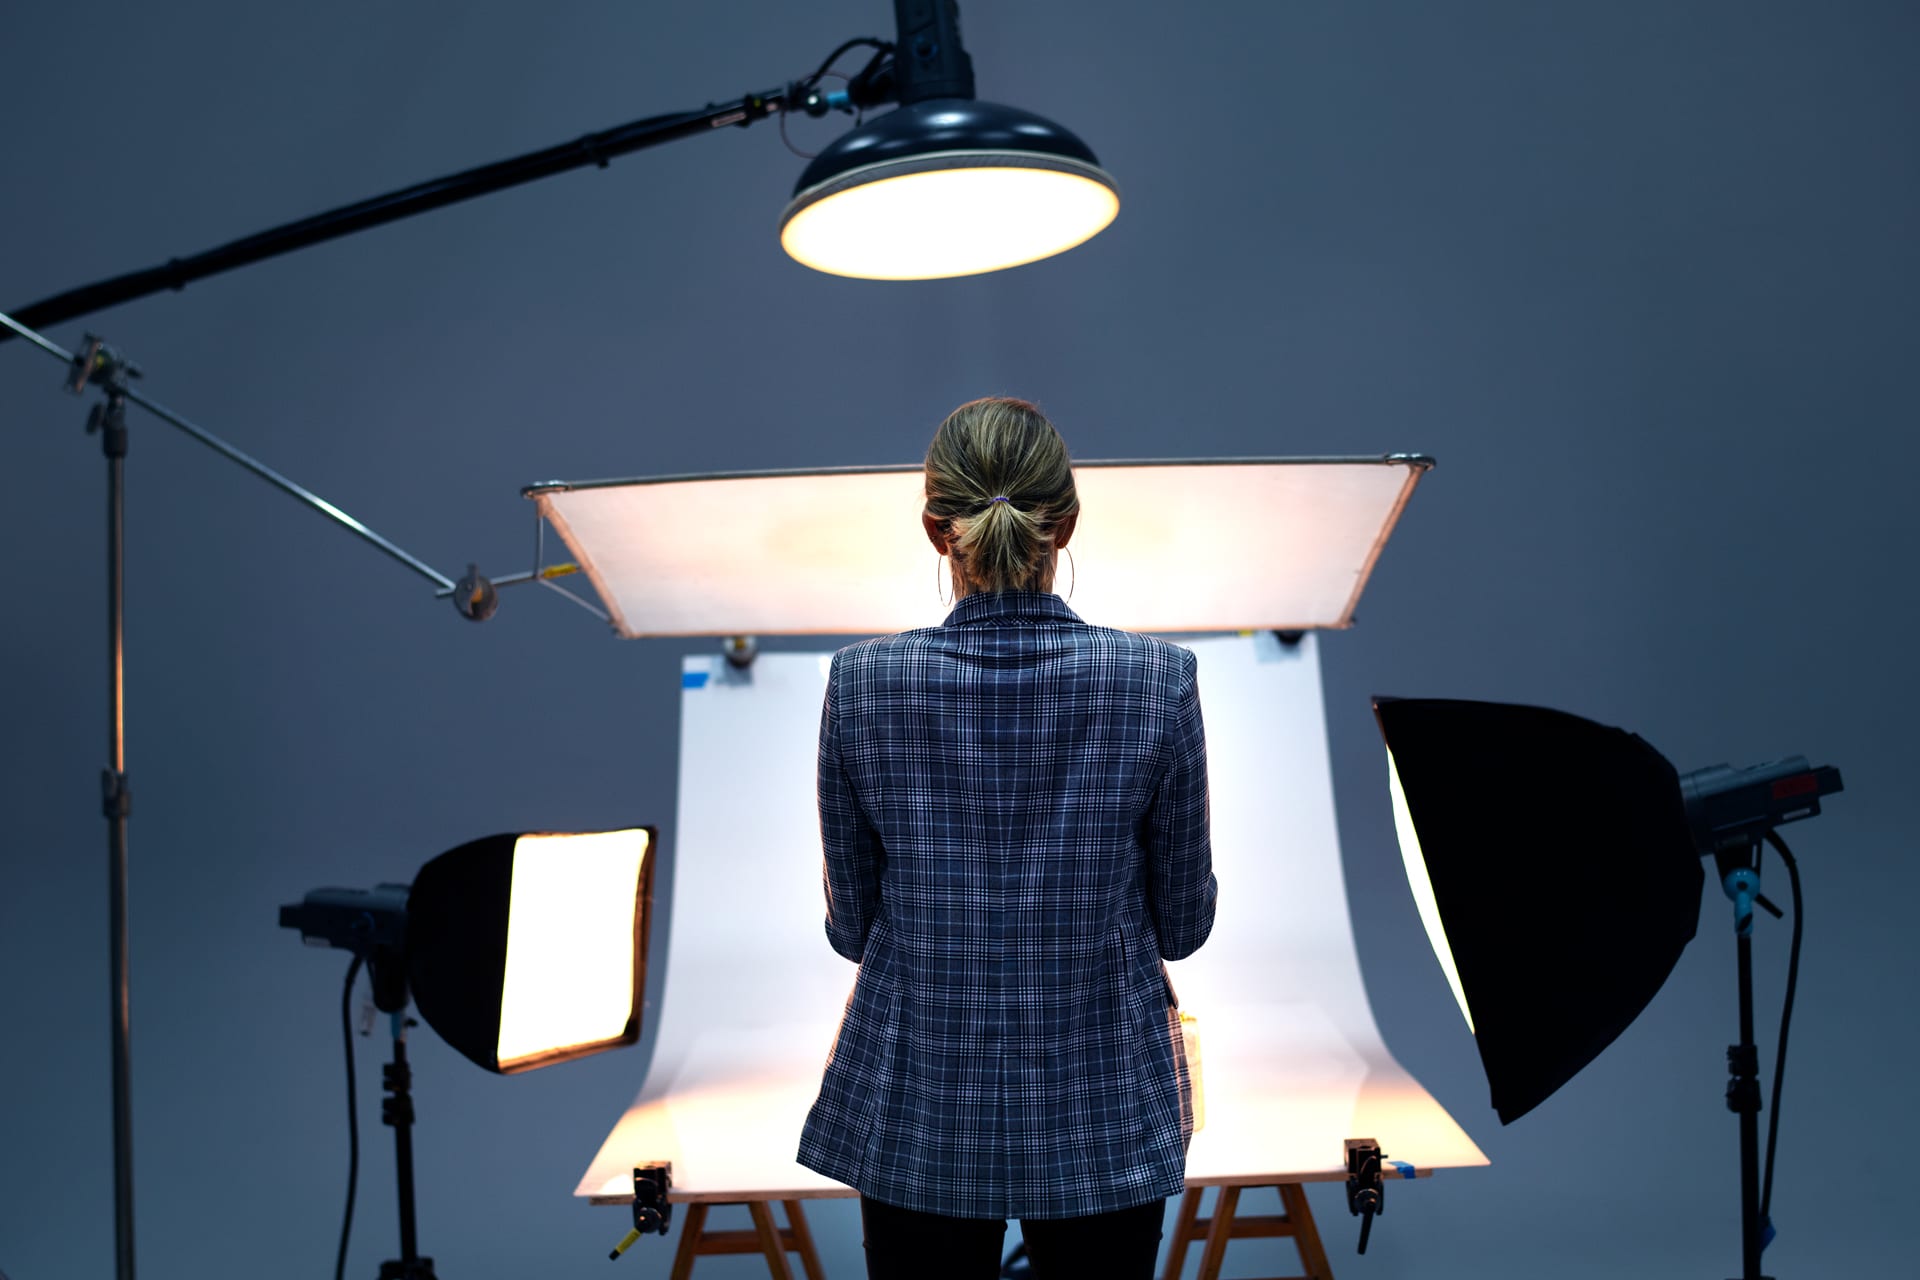 5 Easy Marketing Video Ideas To Get Your Video Marketing Started